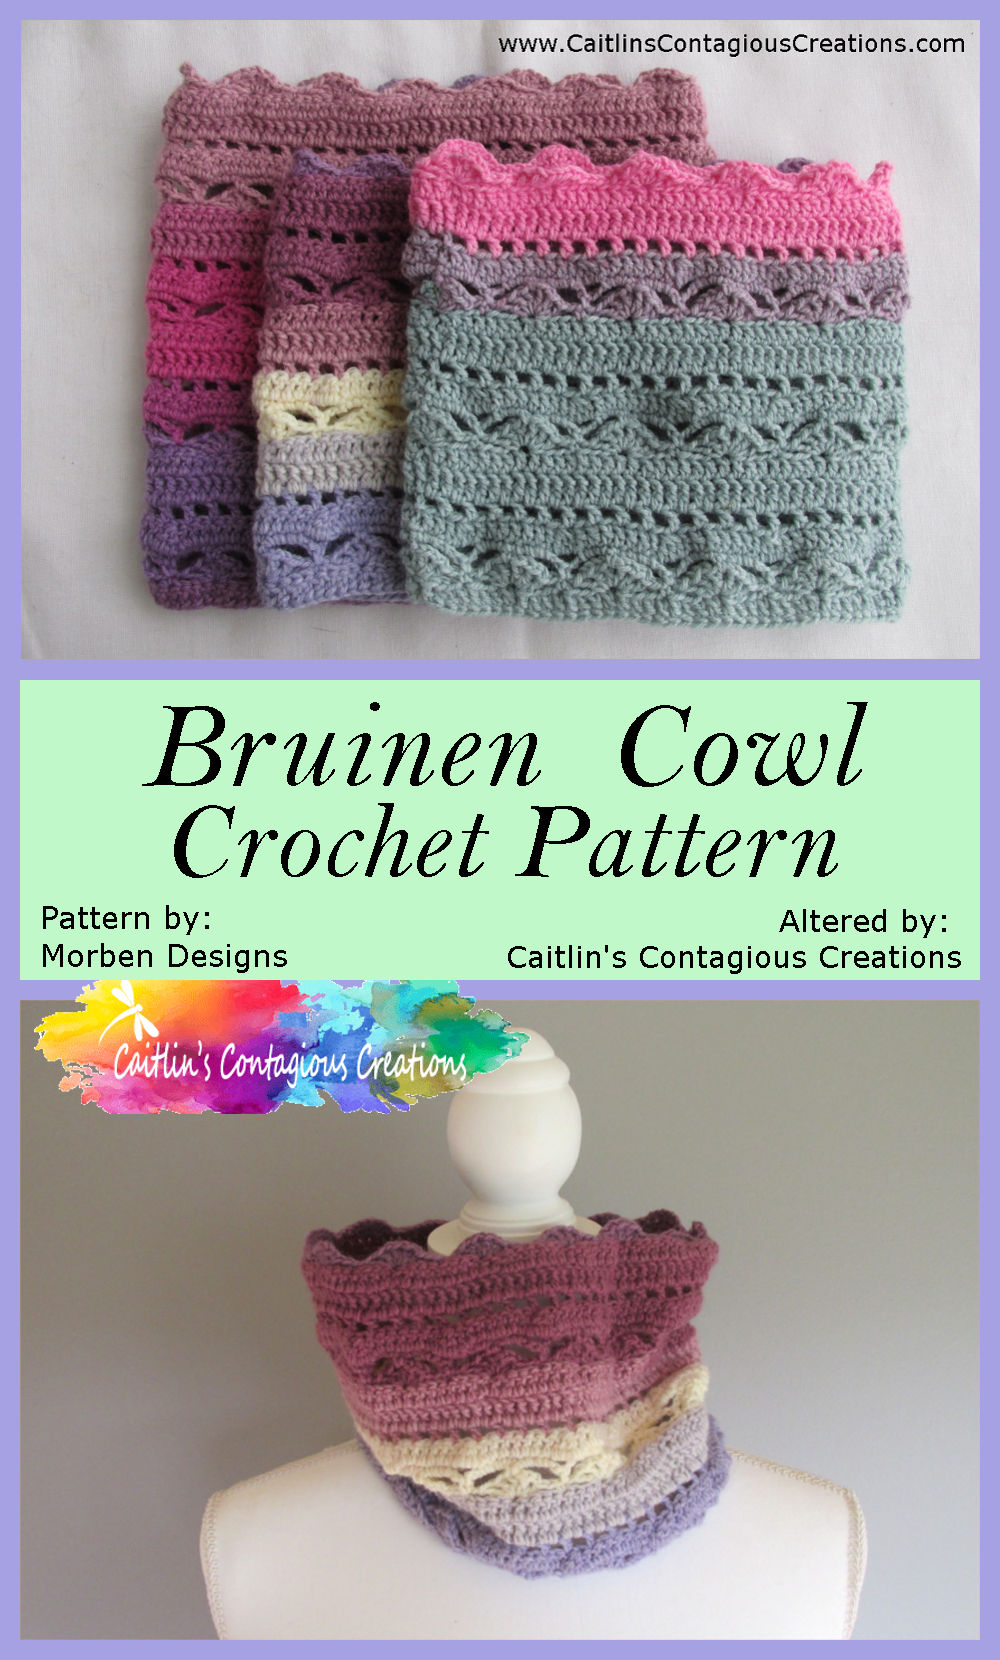 The Bruinen crochet pattern from Morben Designs has been turned into a neck warmer! This lovely shawl crochet pattern is easy and fun to make. This free photo tutorial from Caitlin's Contagious Creations provides step by step instructions for you to make this beautiful cowl.